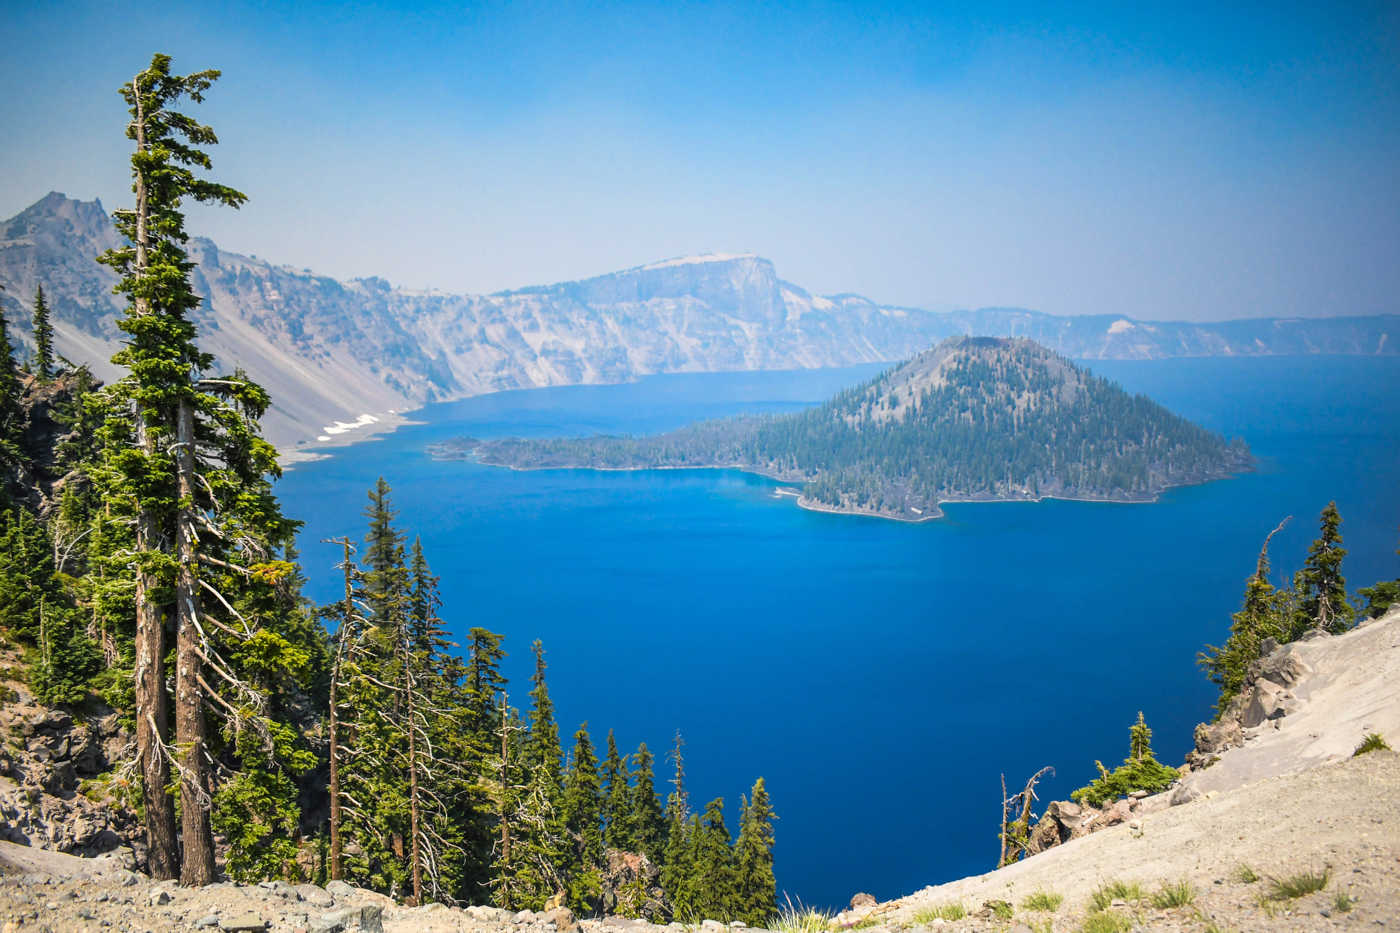 38 ABSOLUTELY PHENOMENAL THINGS TO DO IN OREGON